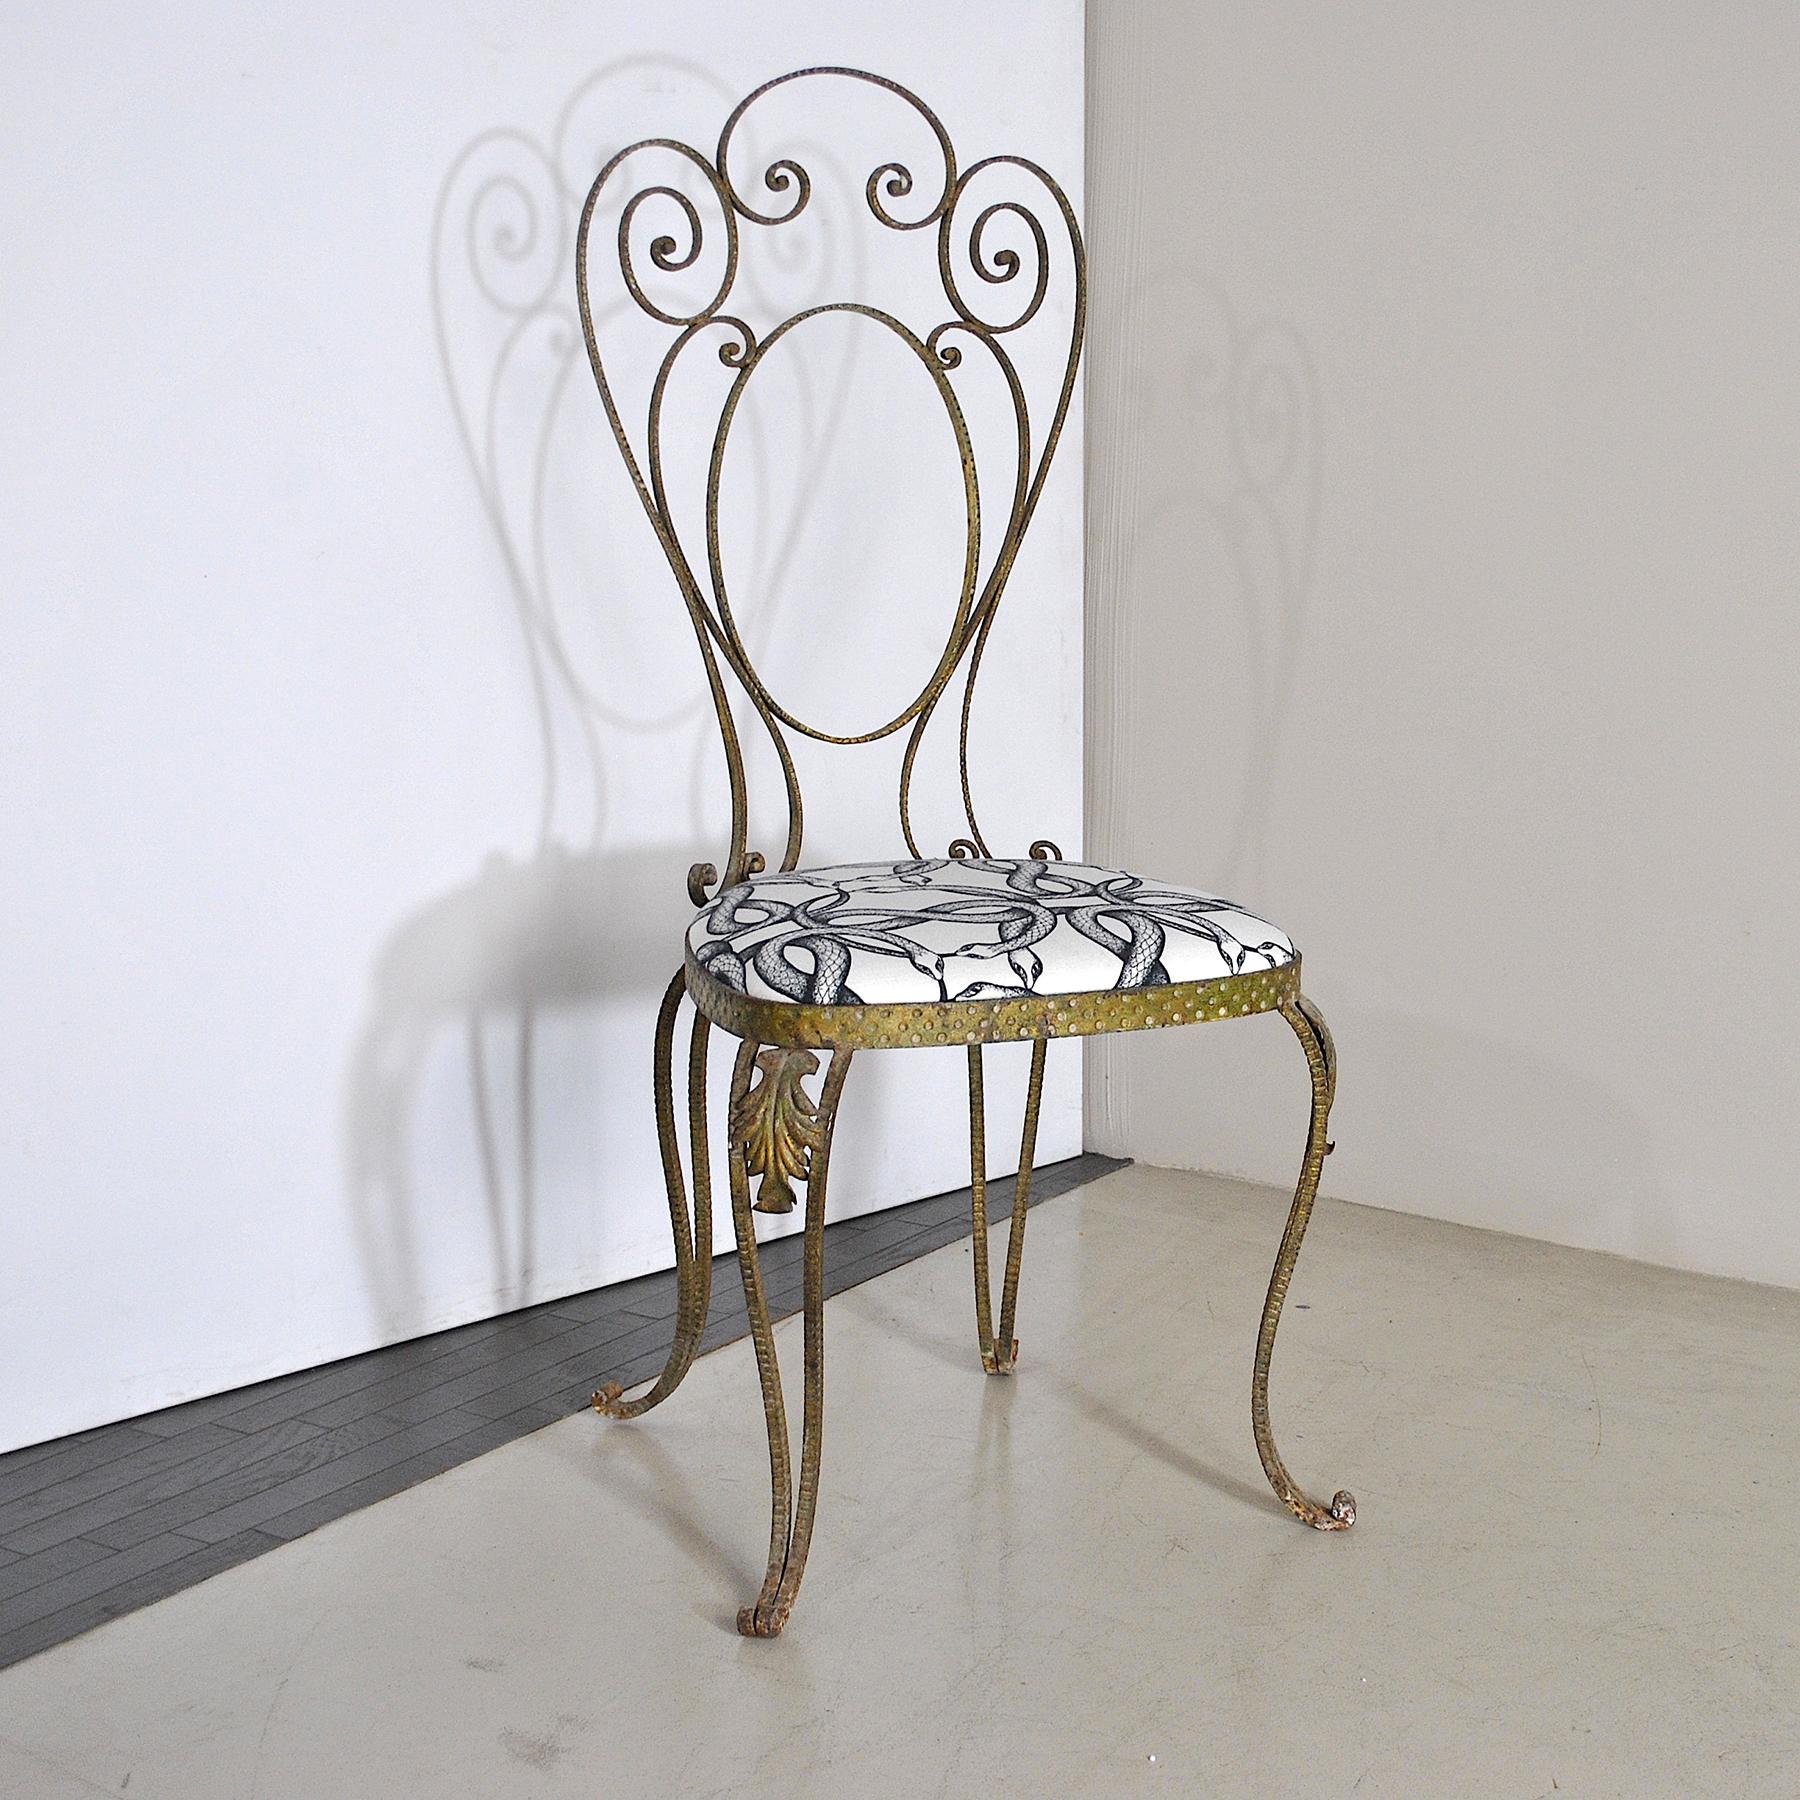 Hammered brass chair by the famous Turin house Pier Luigi Colli, production period 1960s.